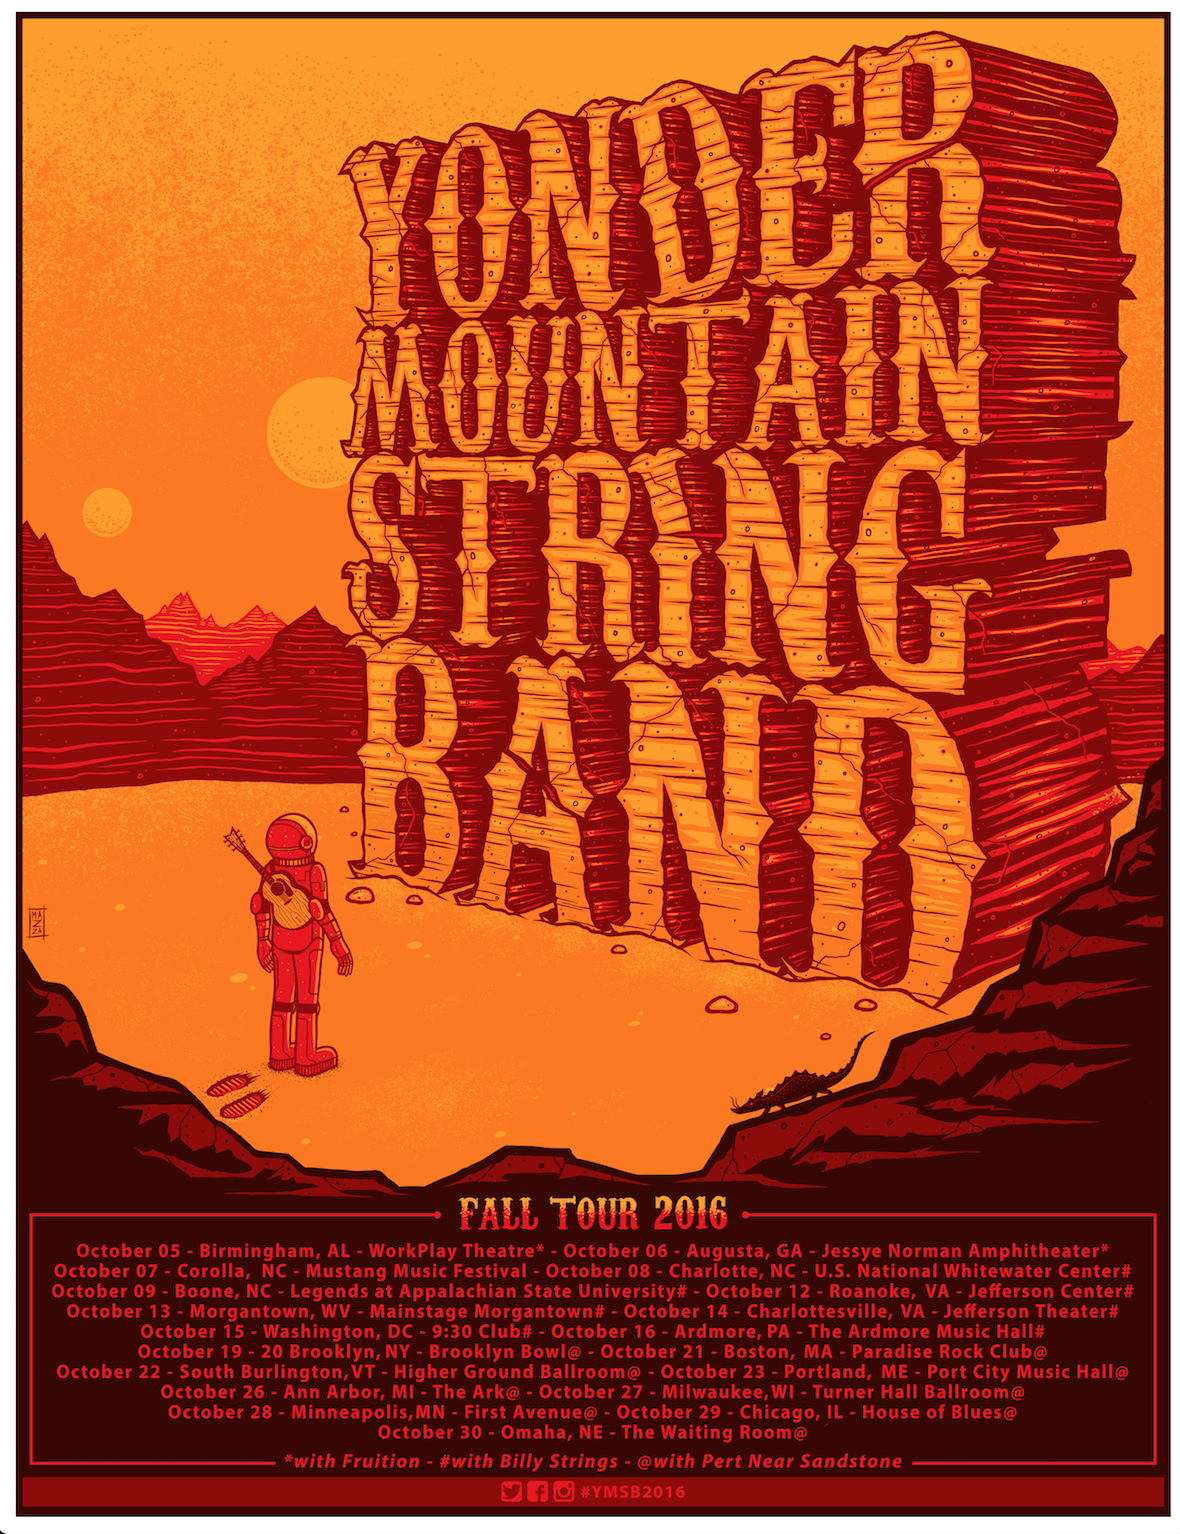 Yonder Mountain String Band Fall Tour 2016. Photo by: Yonder Mountain String Band